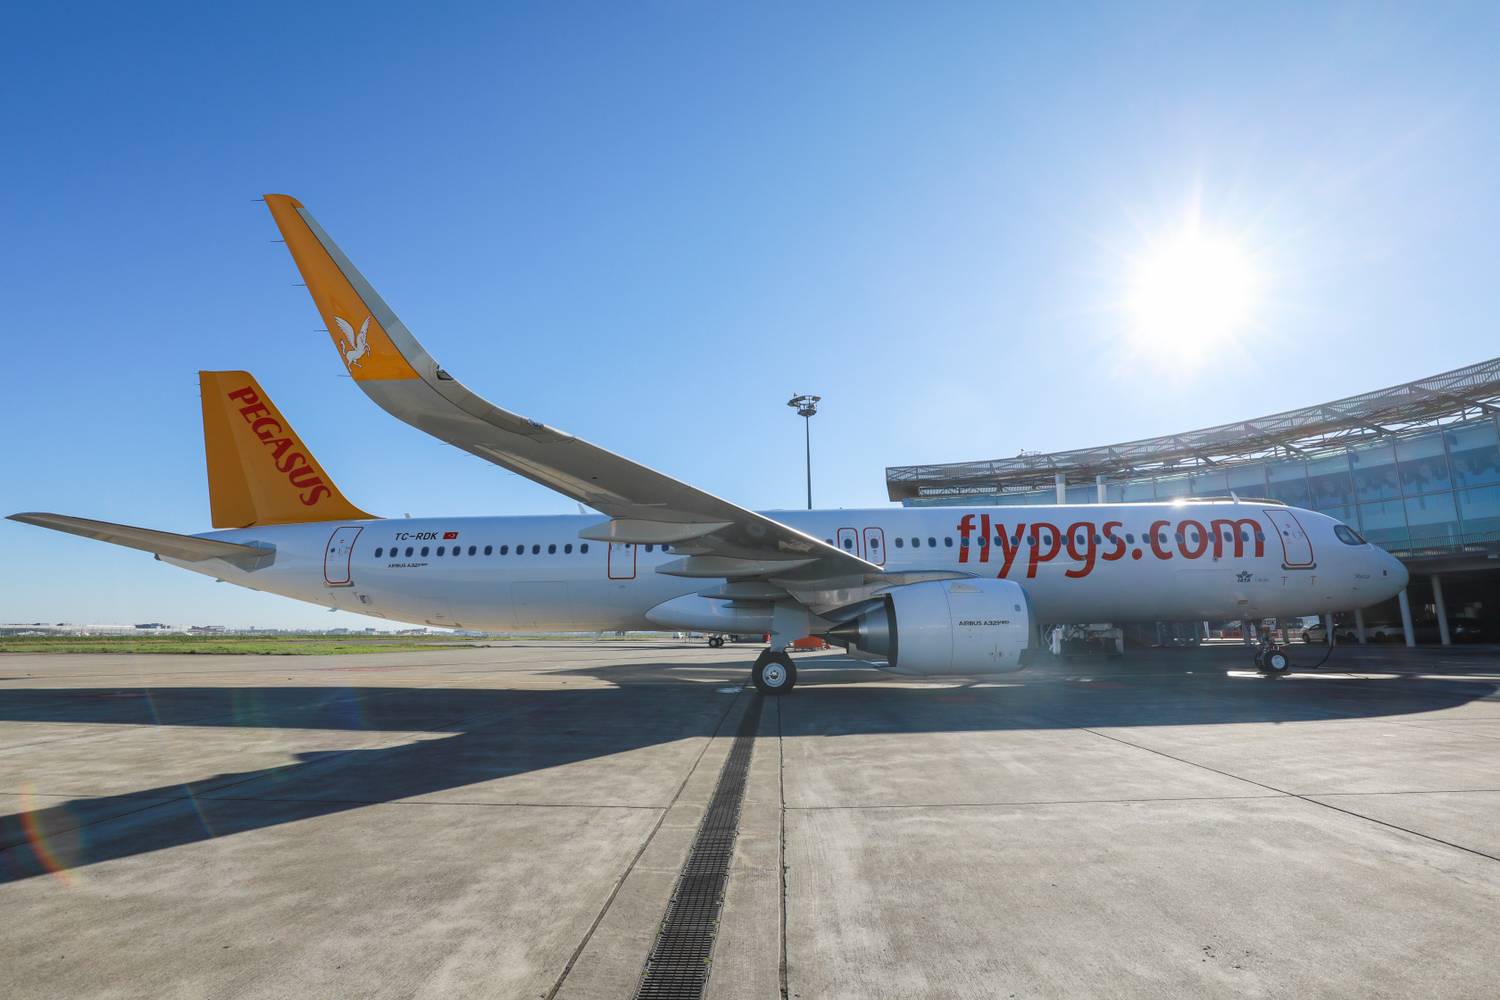 A Pegasus Airlines Airbus A321neo Parked on the apron In Toulouse.